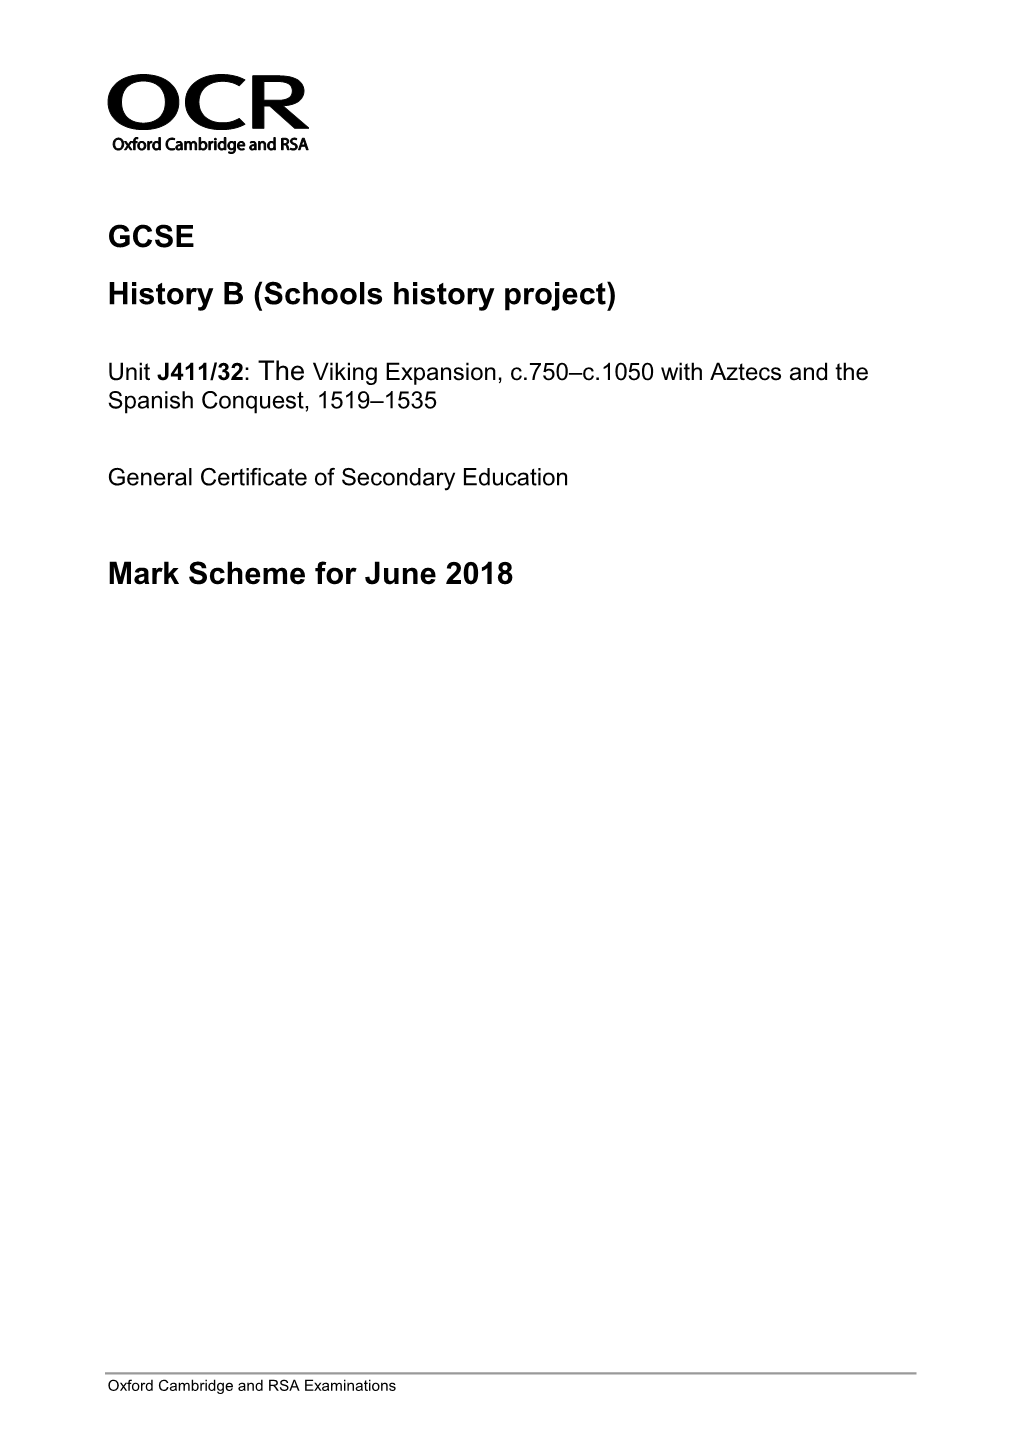 Mark Scheme J411/32 the Viking Expansion, C.750-C.1050 with Aztecs and the Spanish Conquest, 1519-1535 June 2018